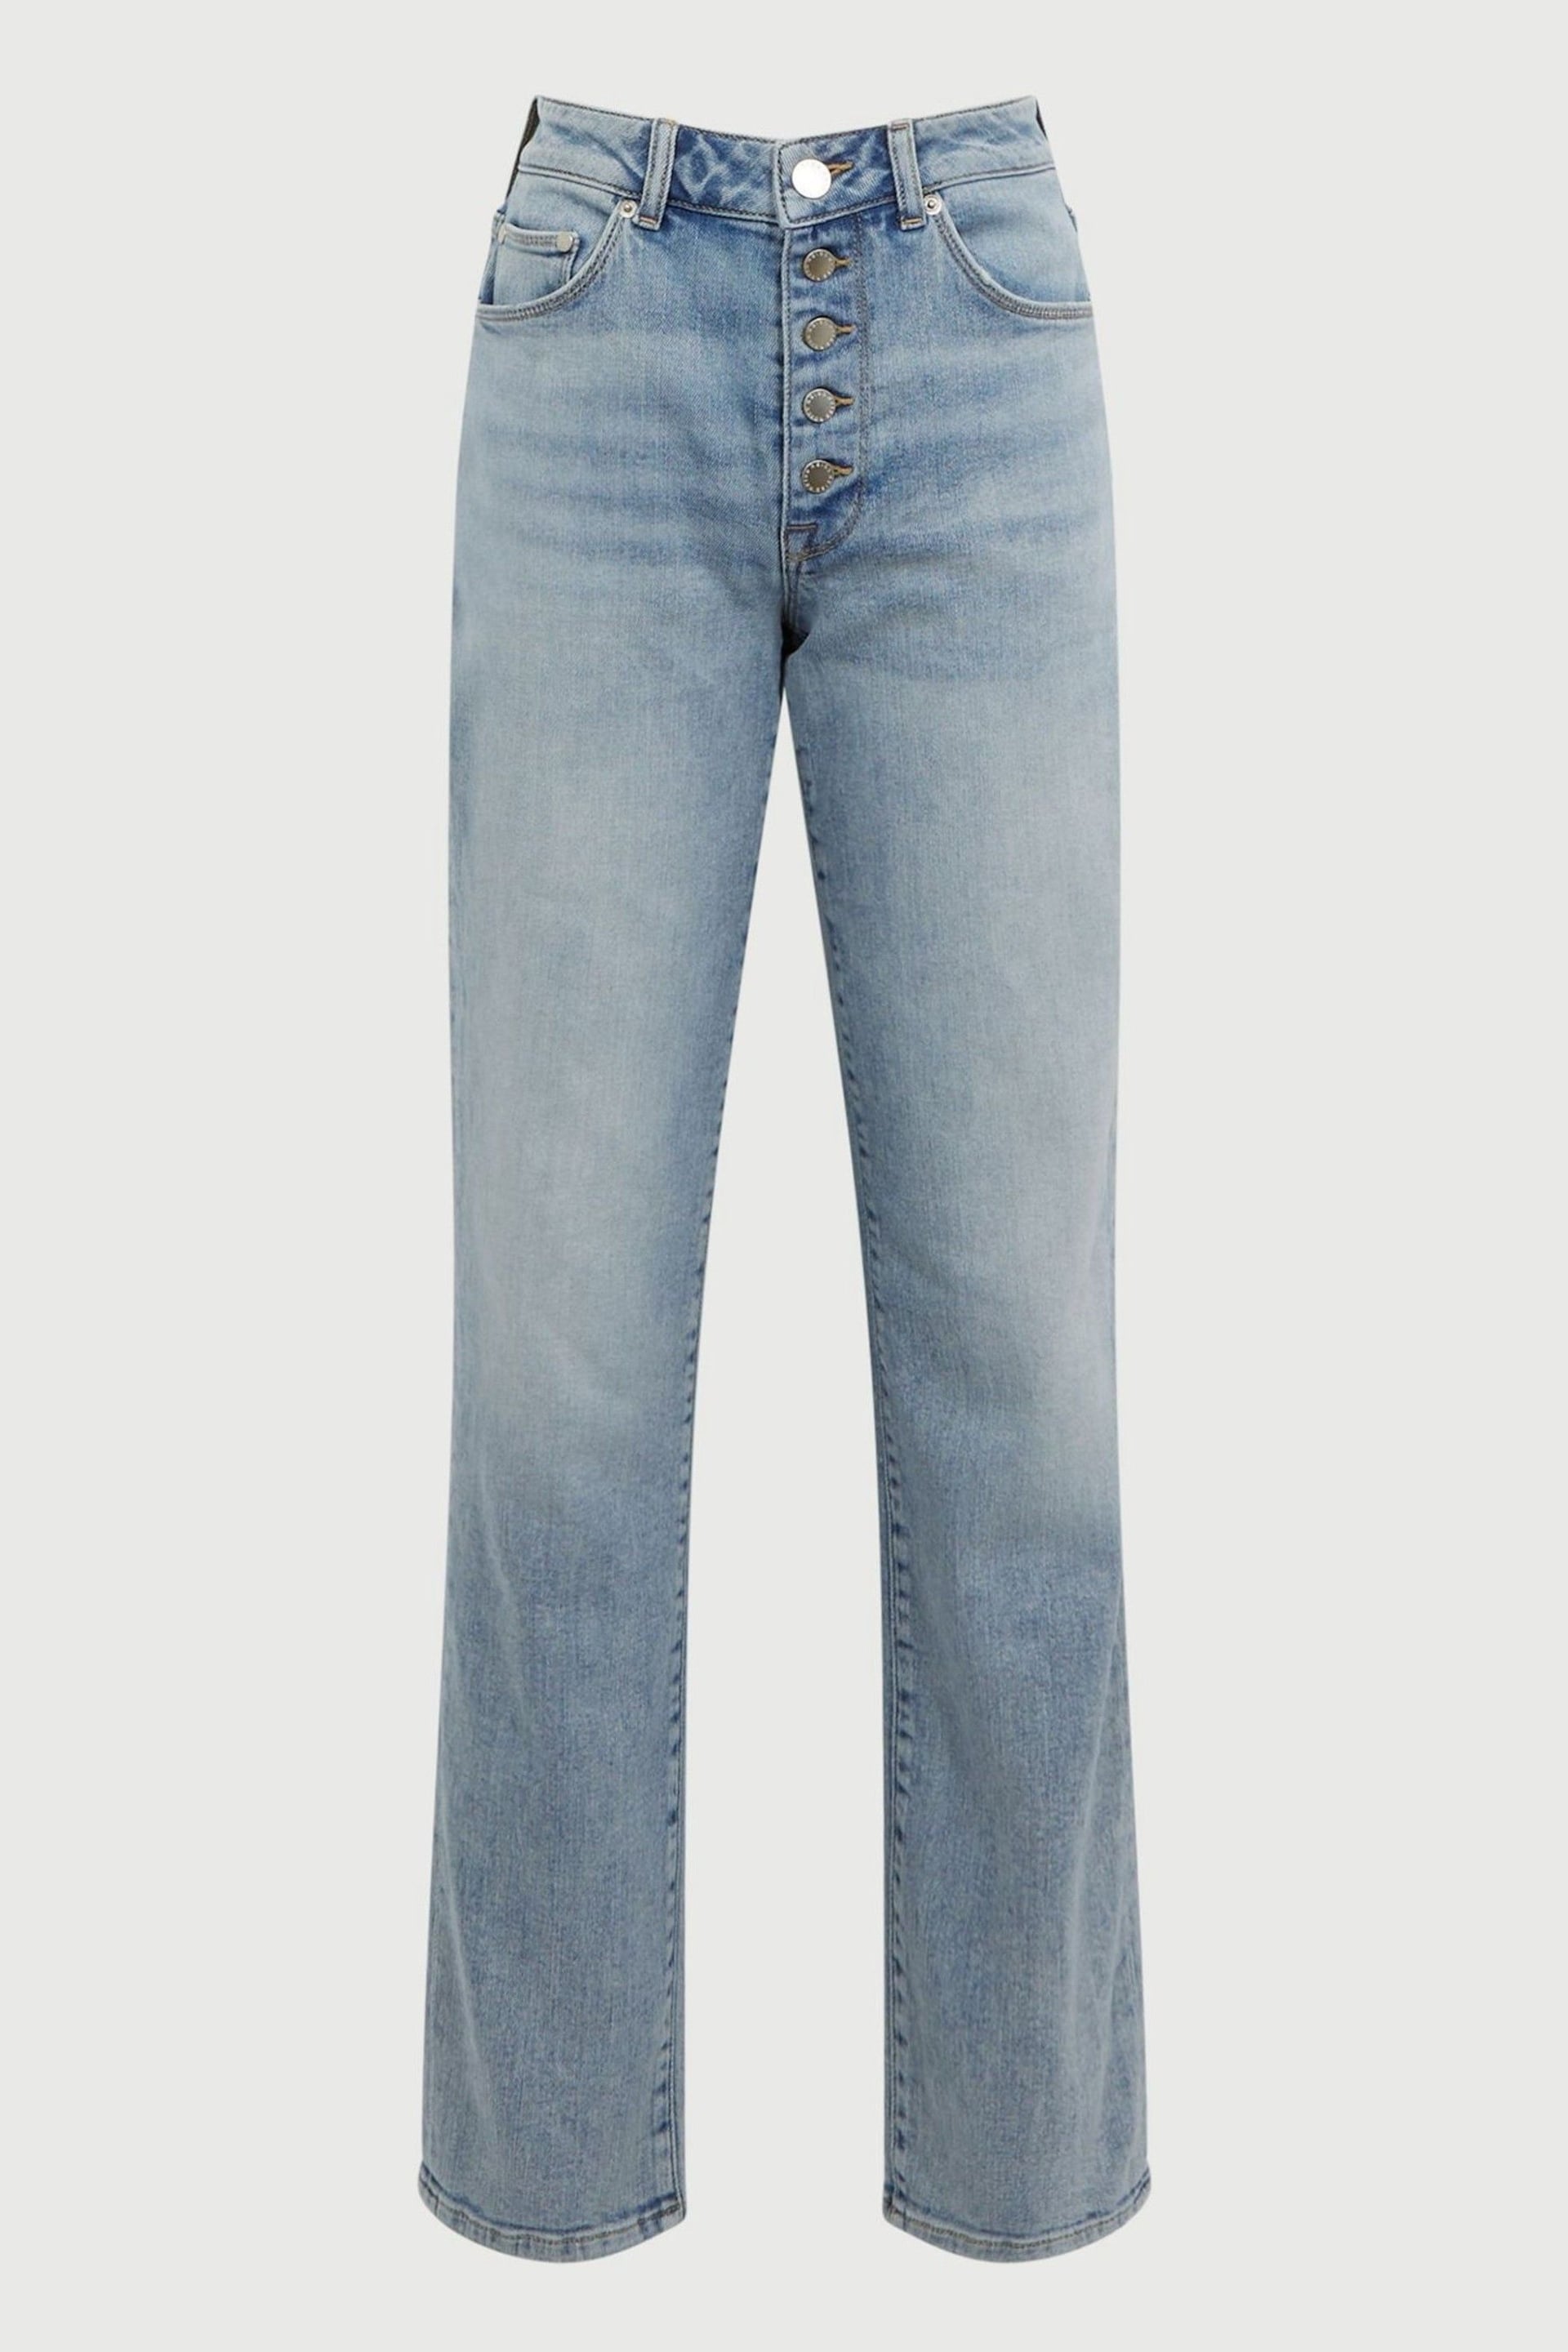 Reiss Light Blue Maisie Cropped Mid Rise Straight Leg Jeans - Image 2 of 5